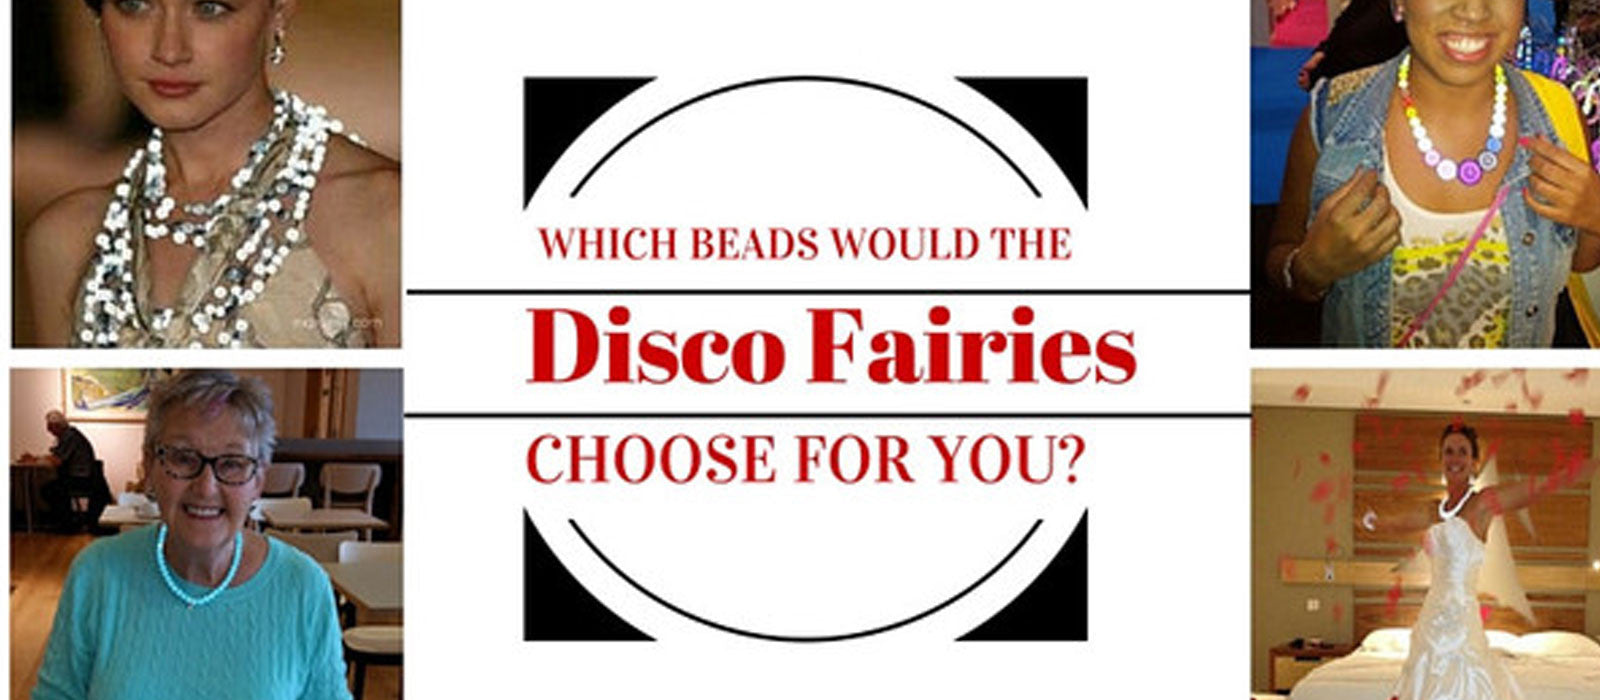 Which Beads Would the Disco Fairies choose for You?